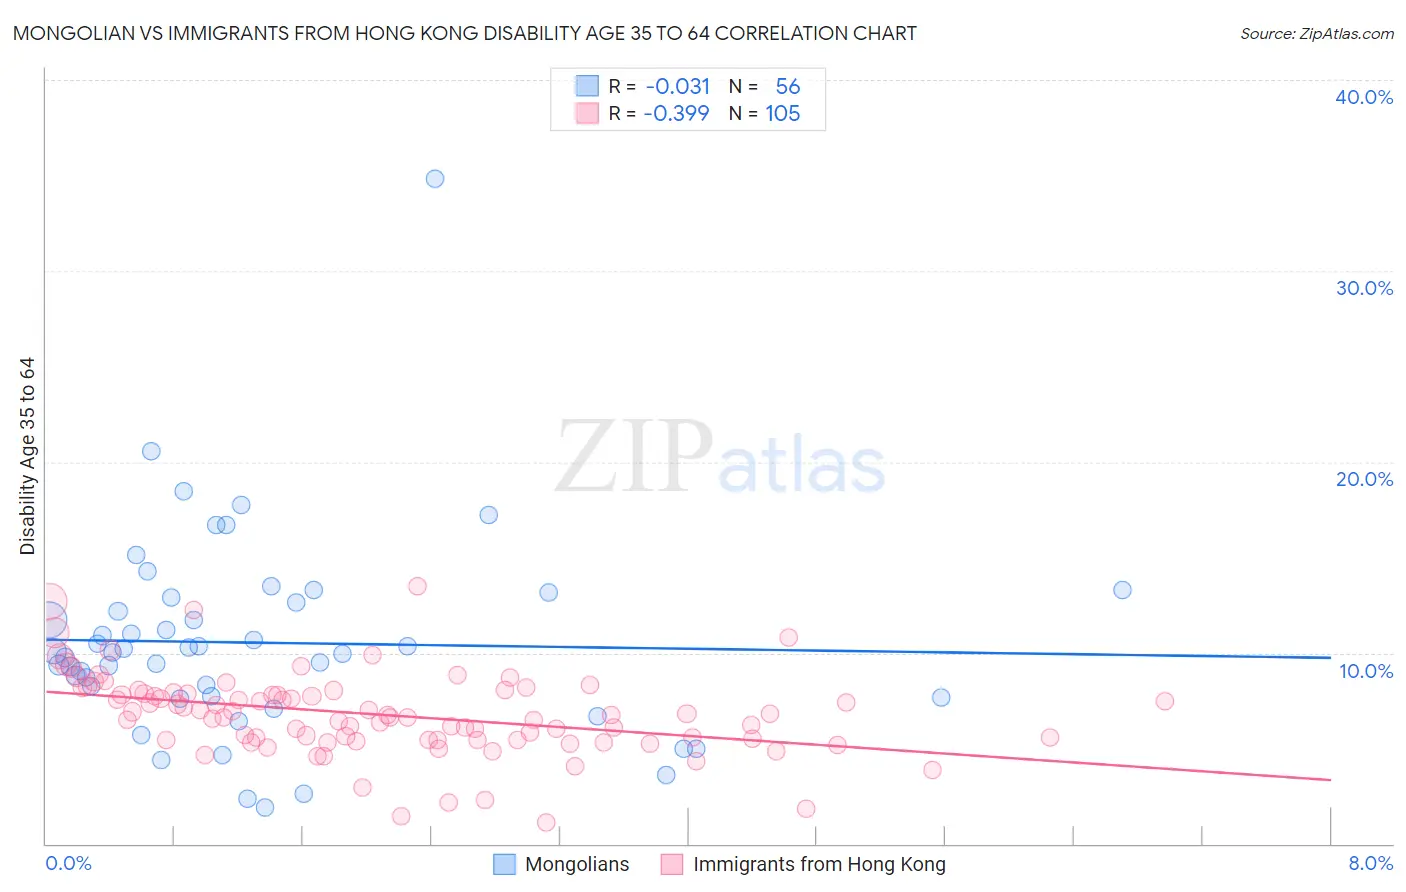 Mongolian vs Immigrants from Hong Kong Disability Age 35 to 64